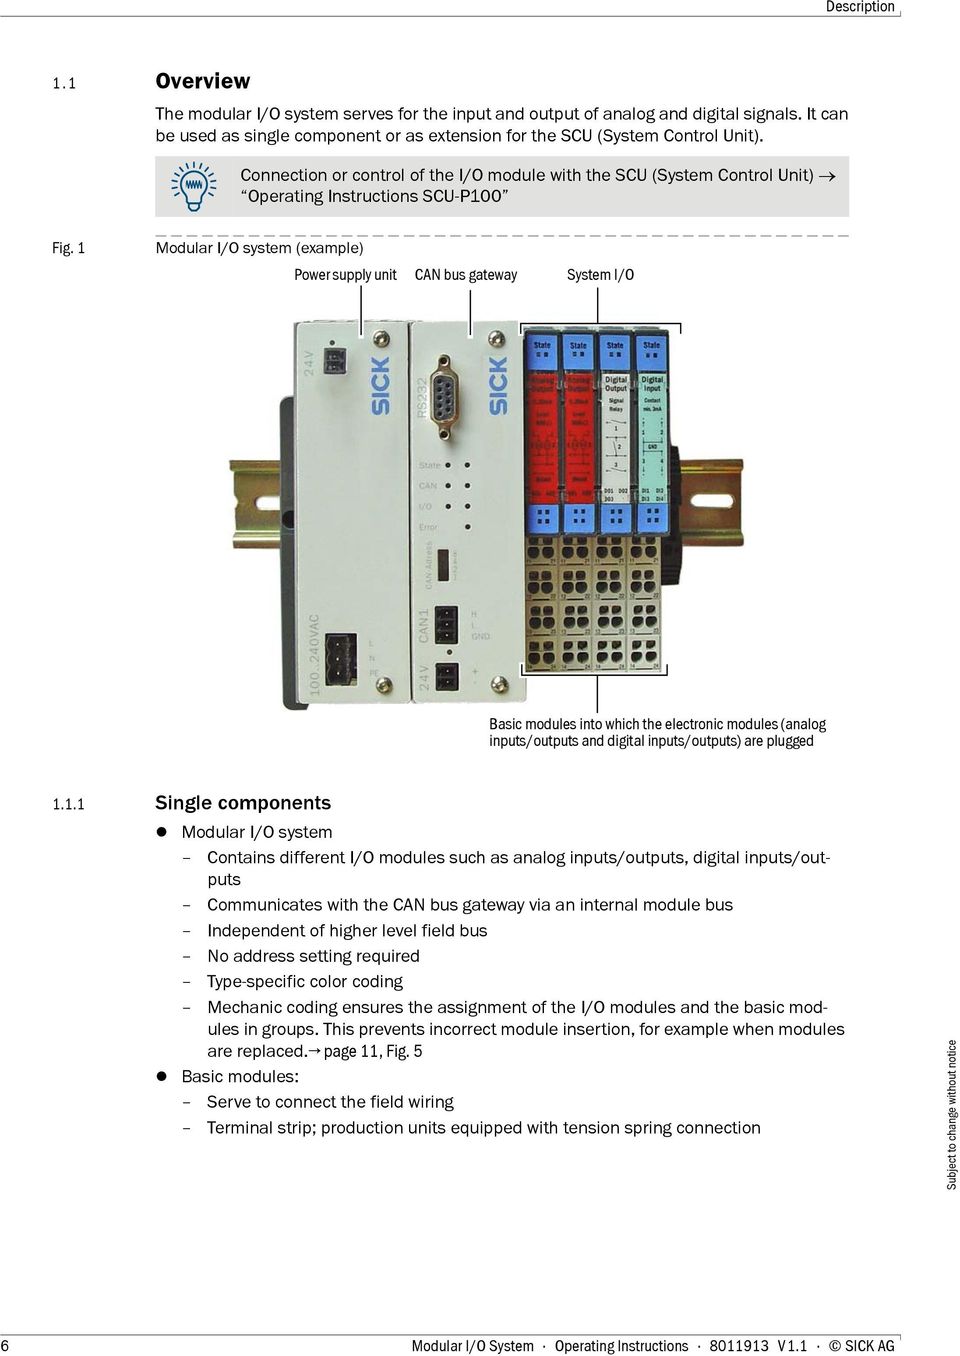 1 Modular I/O system (example) Power supply unit CAN bus gateway System I/O Basic modules into which the electronic modules (analog inputs/outputs and digital inputs/outputs) are plugged 1.1.1 Single